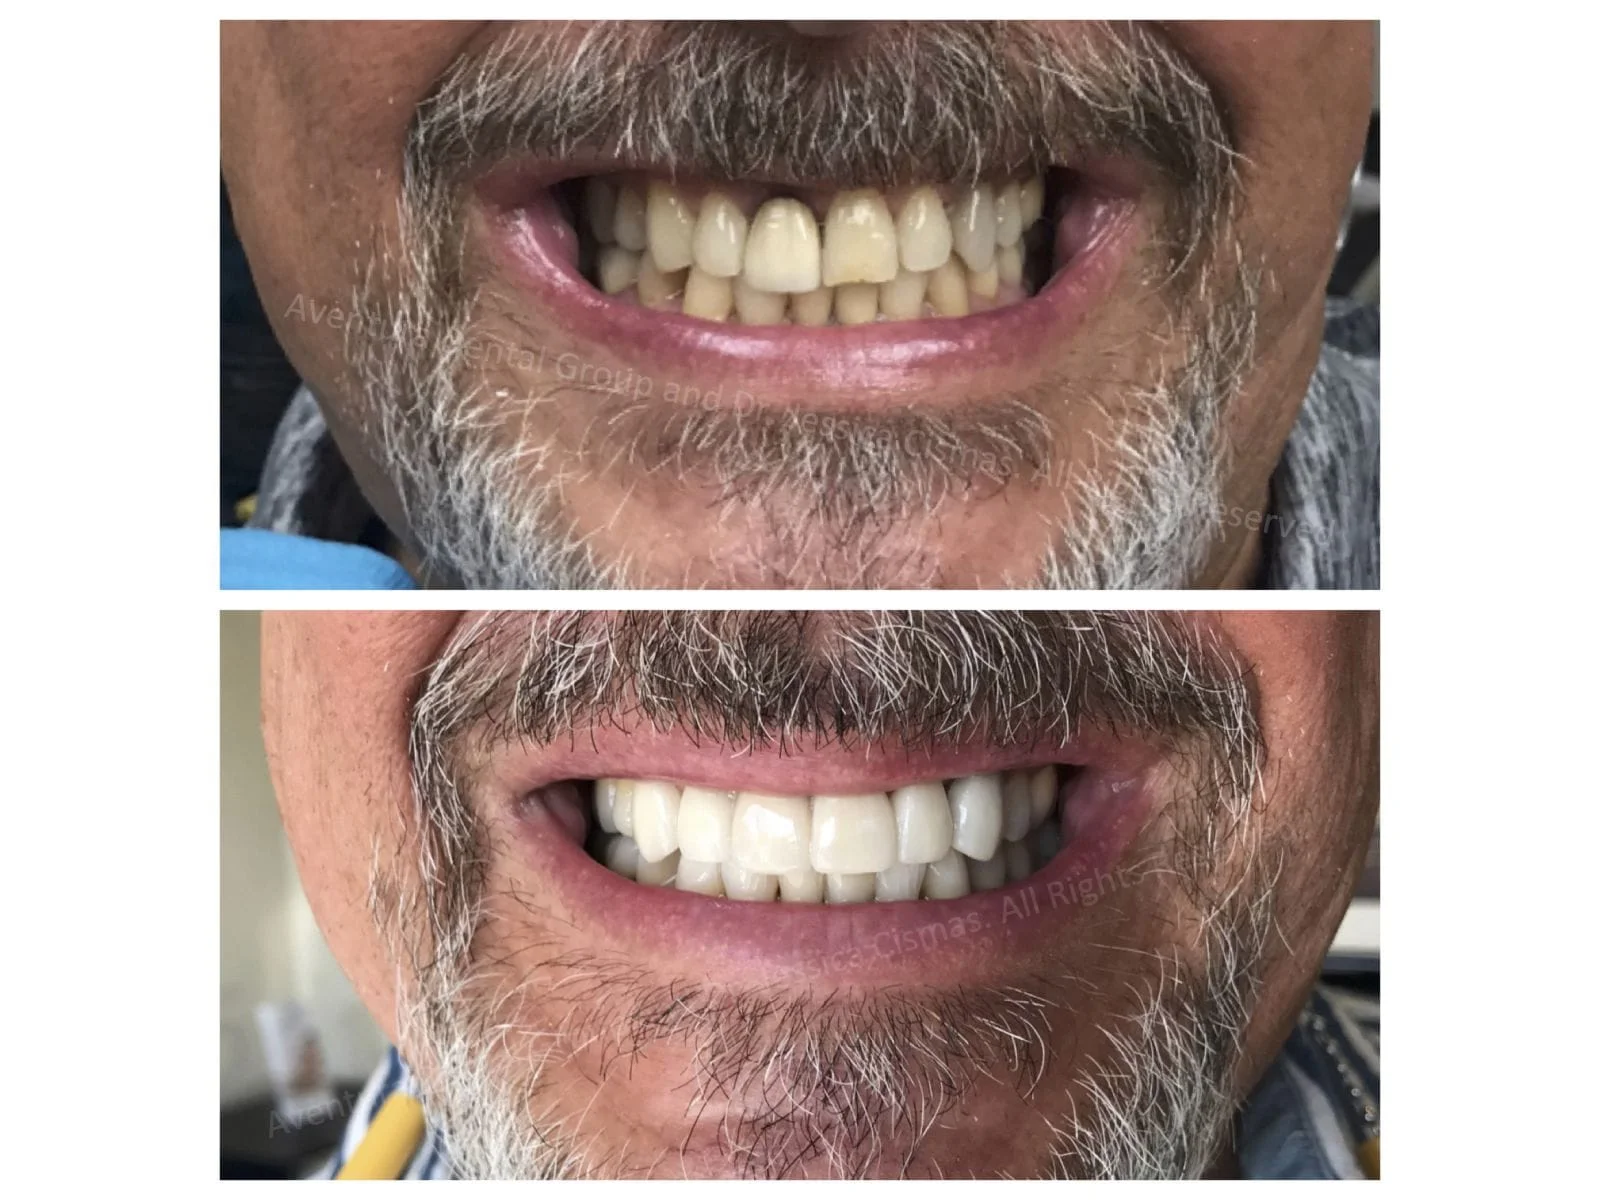 Dr. Jessica Cismas from Aventura Dental Group just completed another full mouth porcelain veneer case sucessfully. At Aventura Dental Group we pride ourselves with building amazing long lasting smiles for lifetime. If you need a second opinion consultation please DM us @aventuradentalgroup on Instagram.